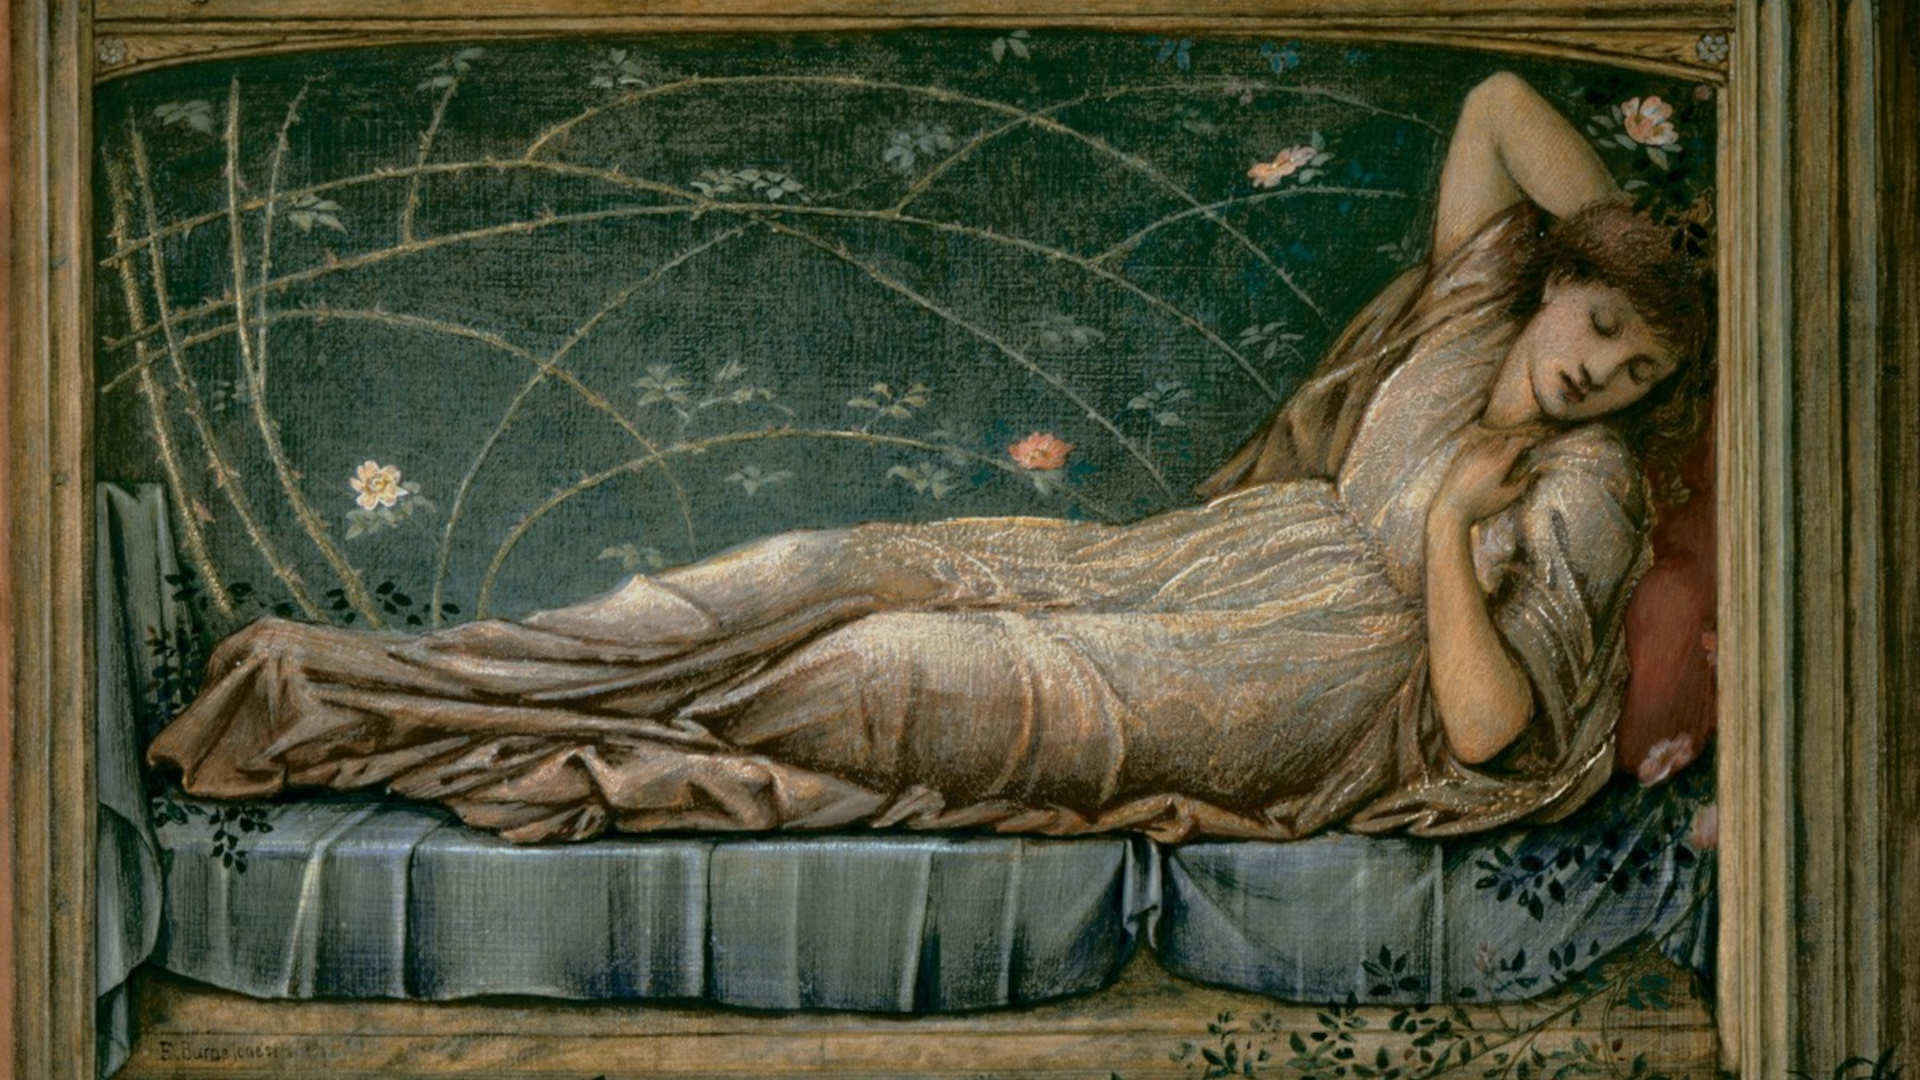 "The Sleeping Beauty," painted by
Edward Burne-Jones in the 1800s.